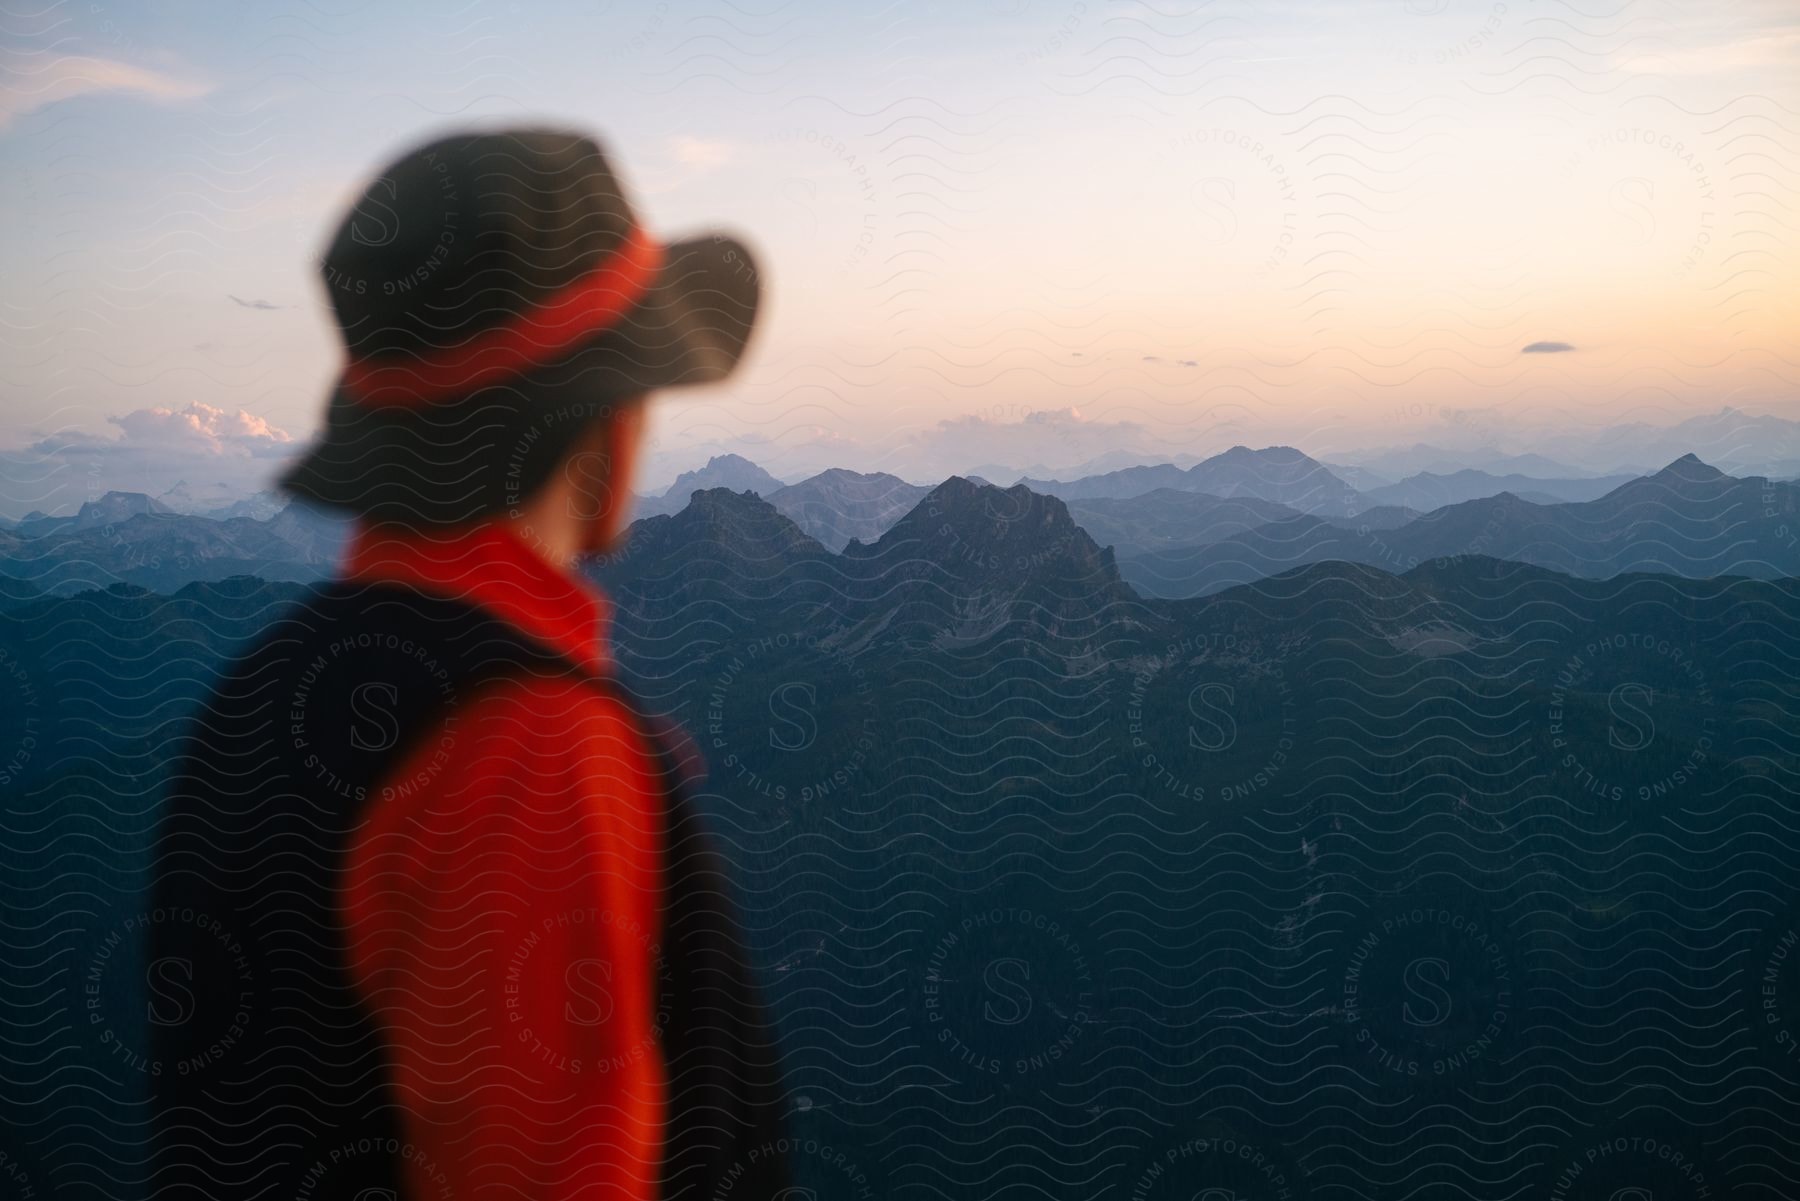 Man wearing a black hat red shirt and black vest looks at distant mountain range during sunset in the alps